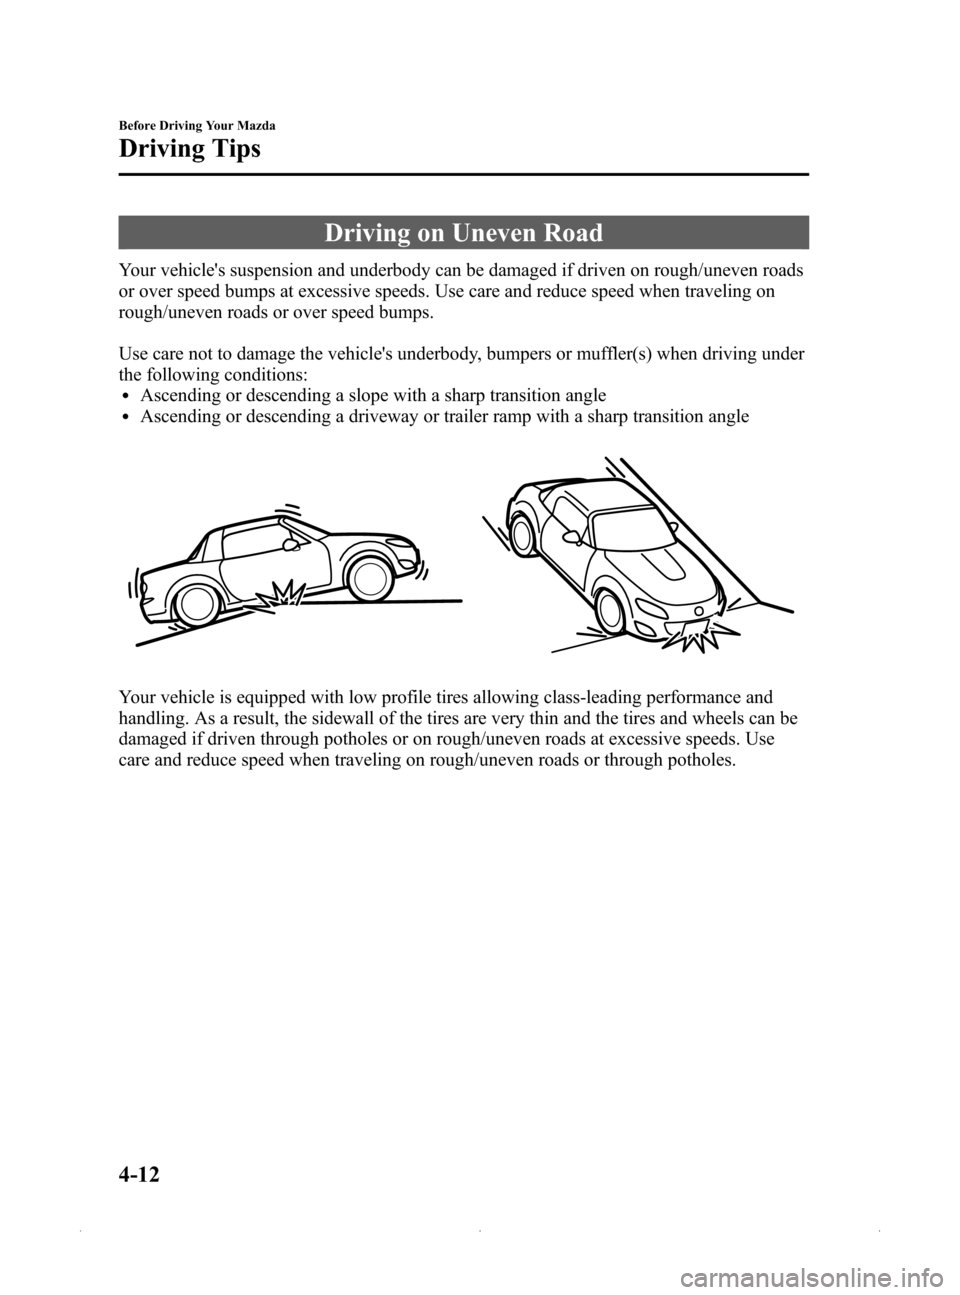 MAZDA MODEL MX-5 2015  Owners Manual (in English) Black plate (142,1)
Driving on Uneven Road
Your vehicles suspension and underbody can be damaged if driven on rough/uneven roads
or over speed bumps at excessive speeds. Use care and reduce speed whe